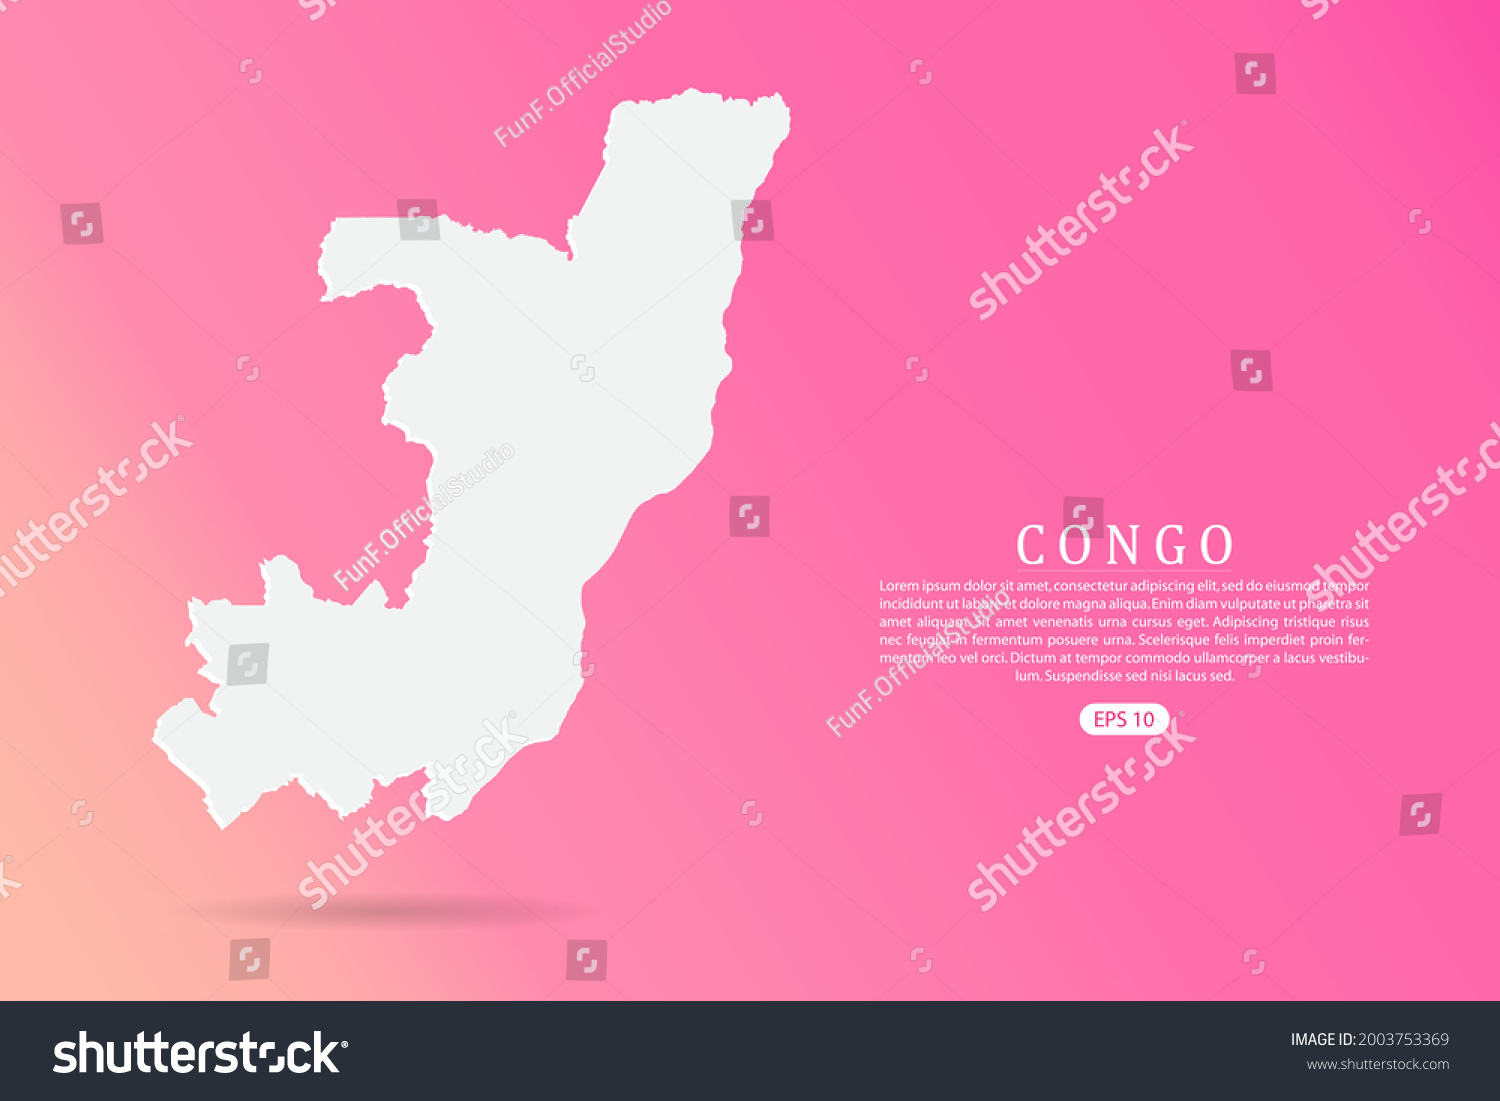 Congo Map - World map vector template with 3d white color on Pink gradient background for infographic - Vector illustration eps 10 #2003753369